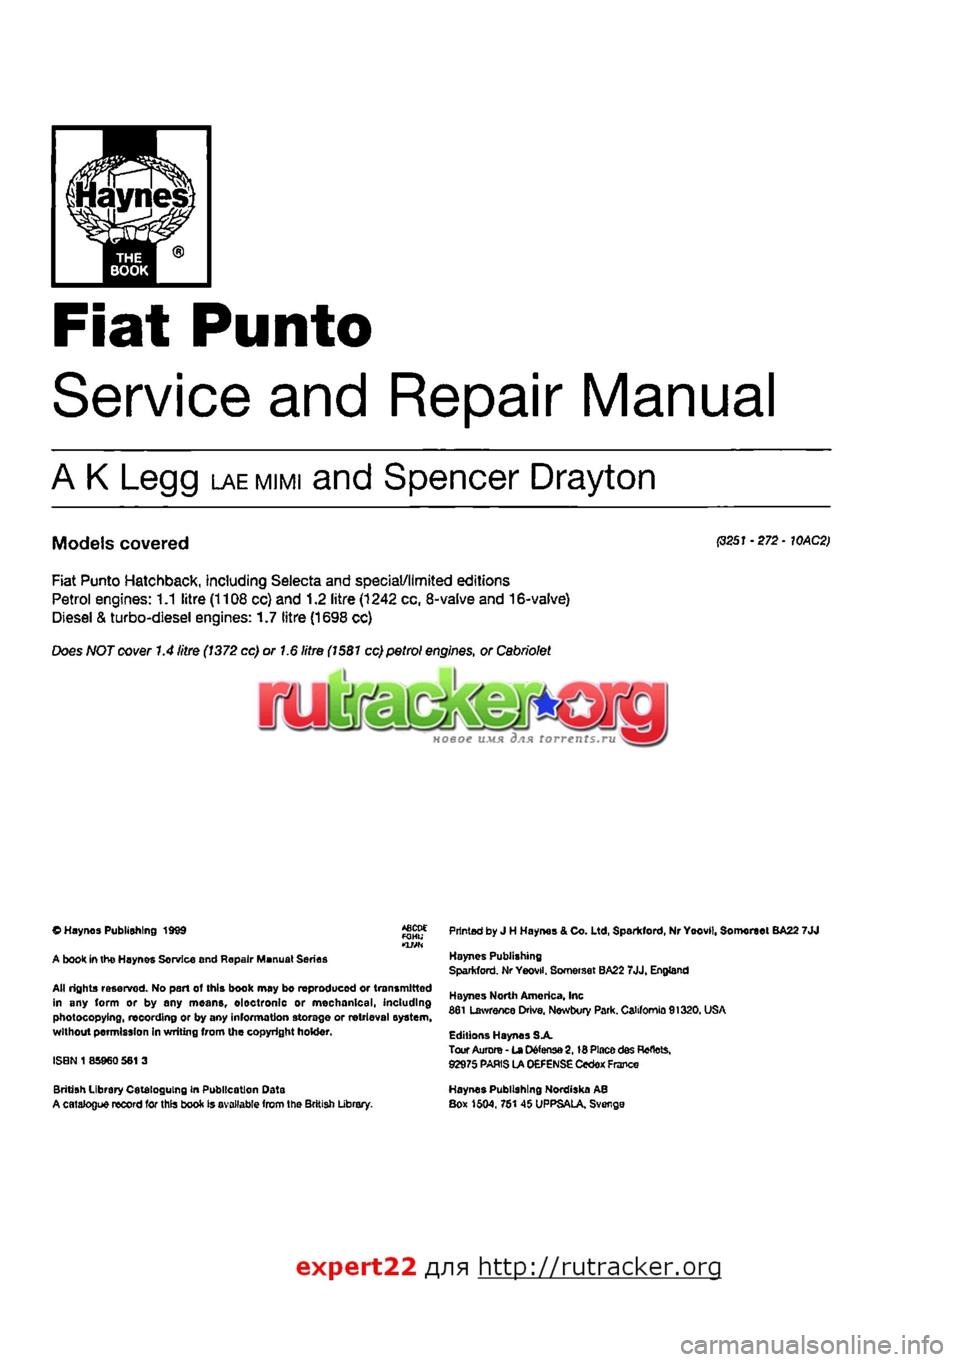 FIAT PUNTO 1999 176 / 1.G Workshop Manual 
Fiat Punto 
Service and Repair Manual 
A K Legg LAEMIMI and Spencer Drayton 
Models covered P251 •272 • WAC2> 
Fiat Punto Hatchback, including Selecta and special/limited editions Petrol engines: